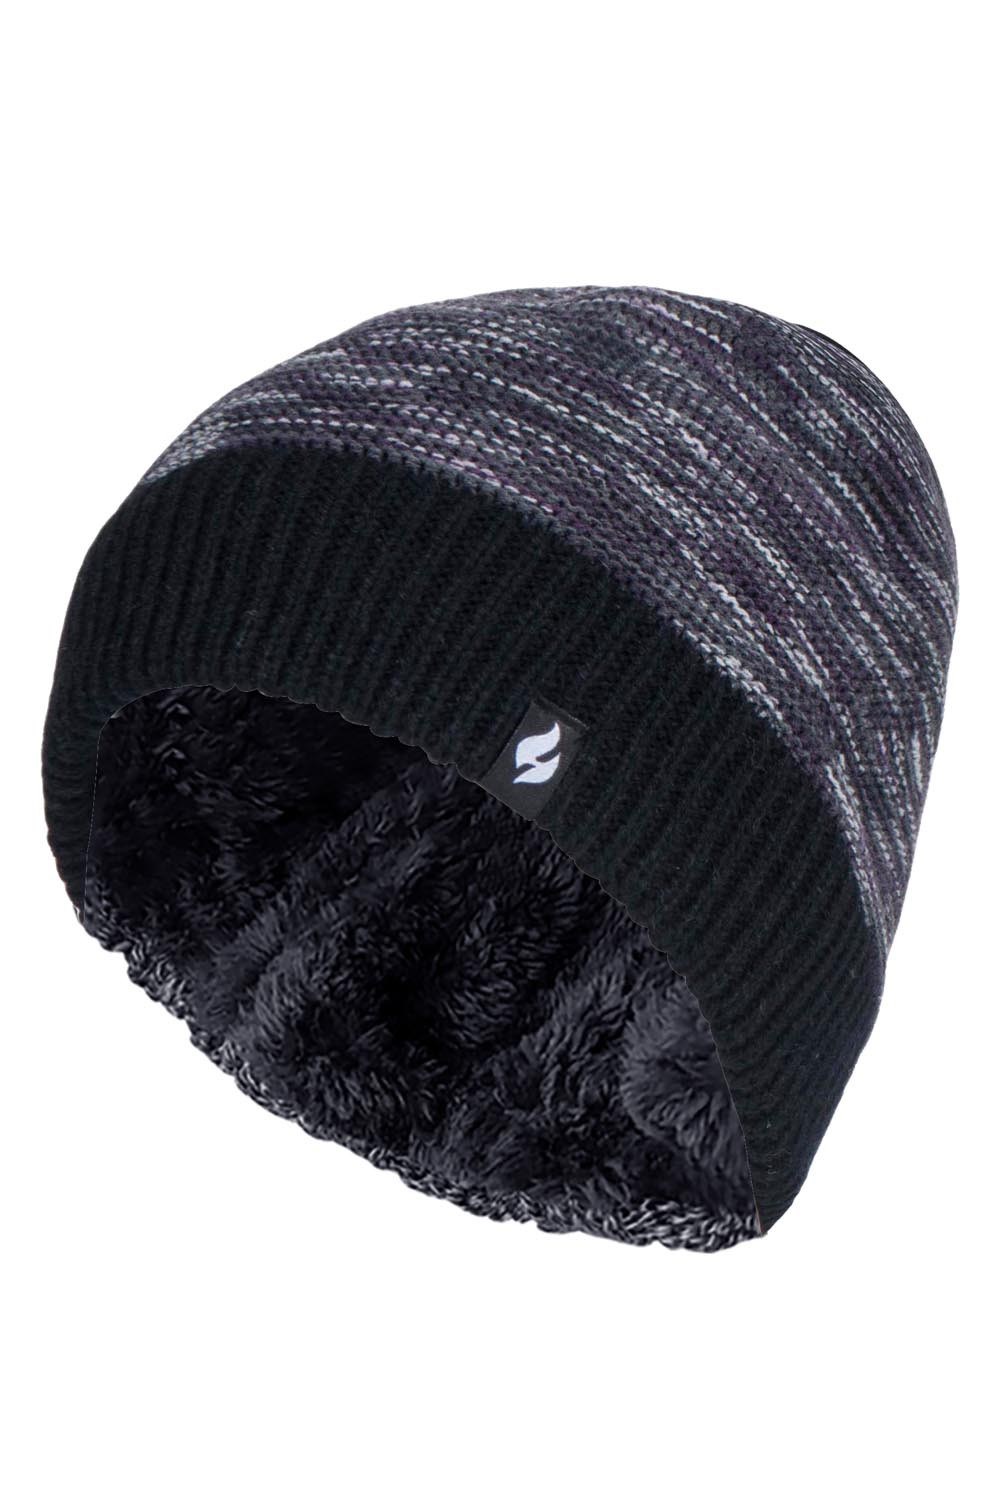 Womens Winter Thermal Bobble Hat -